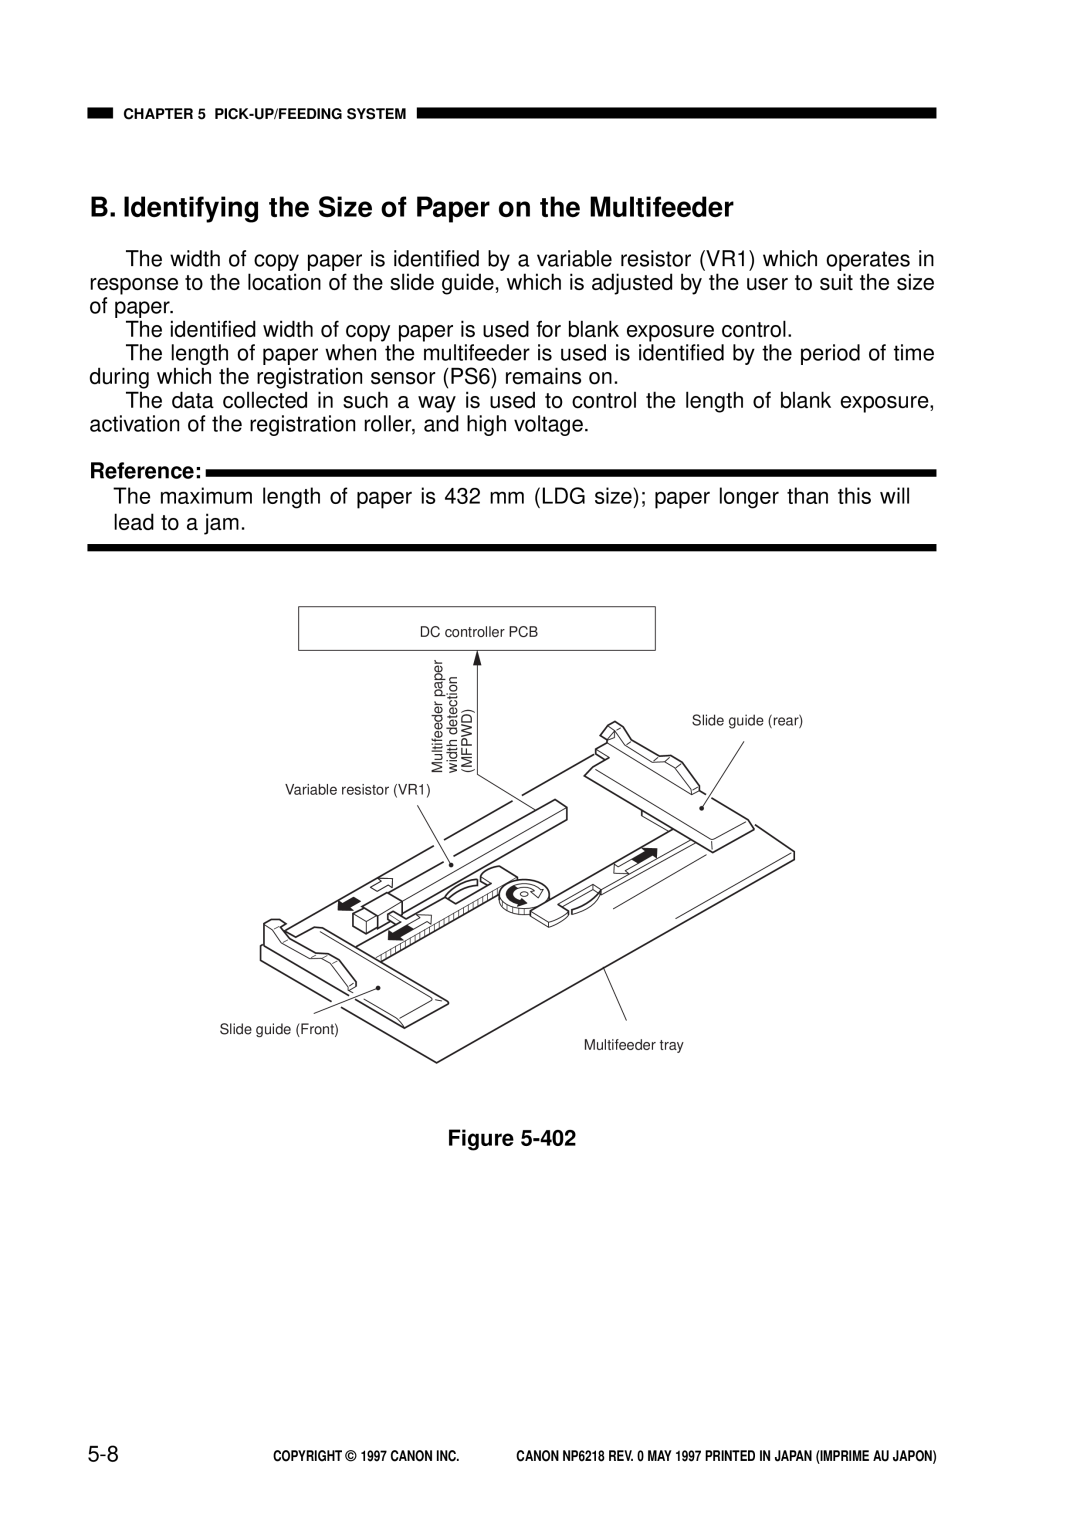 Canon FY8-13EX-000, NP6218 service manual B. Identifying the Size of Paper on the Multifeeder, Reference 